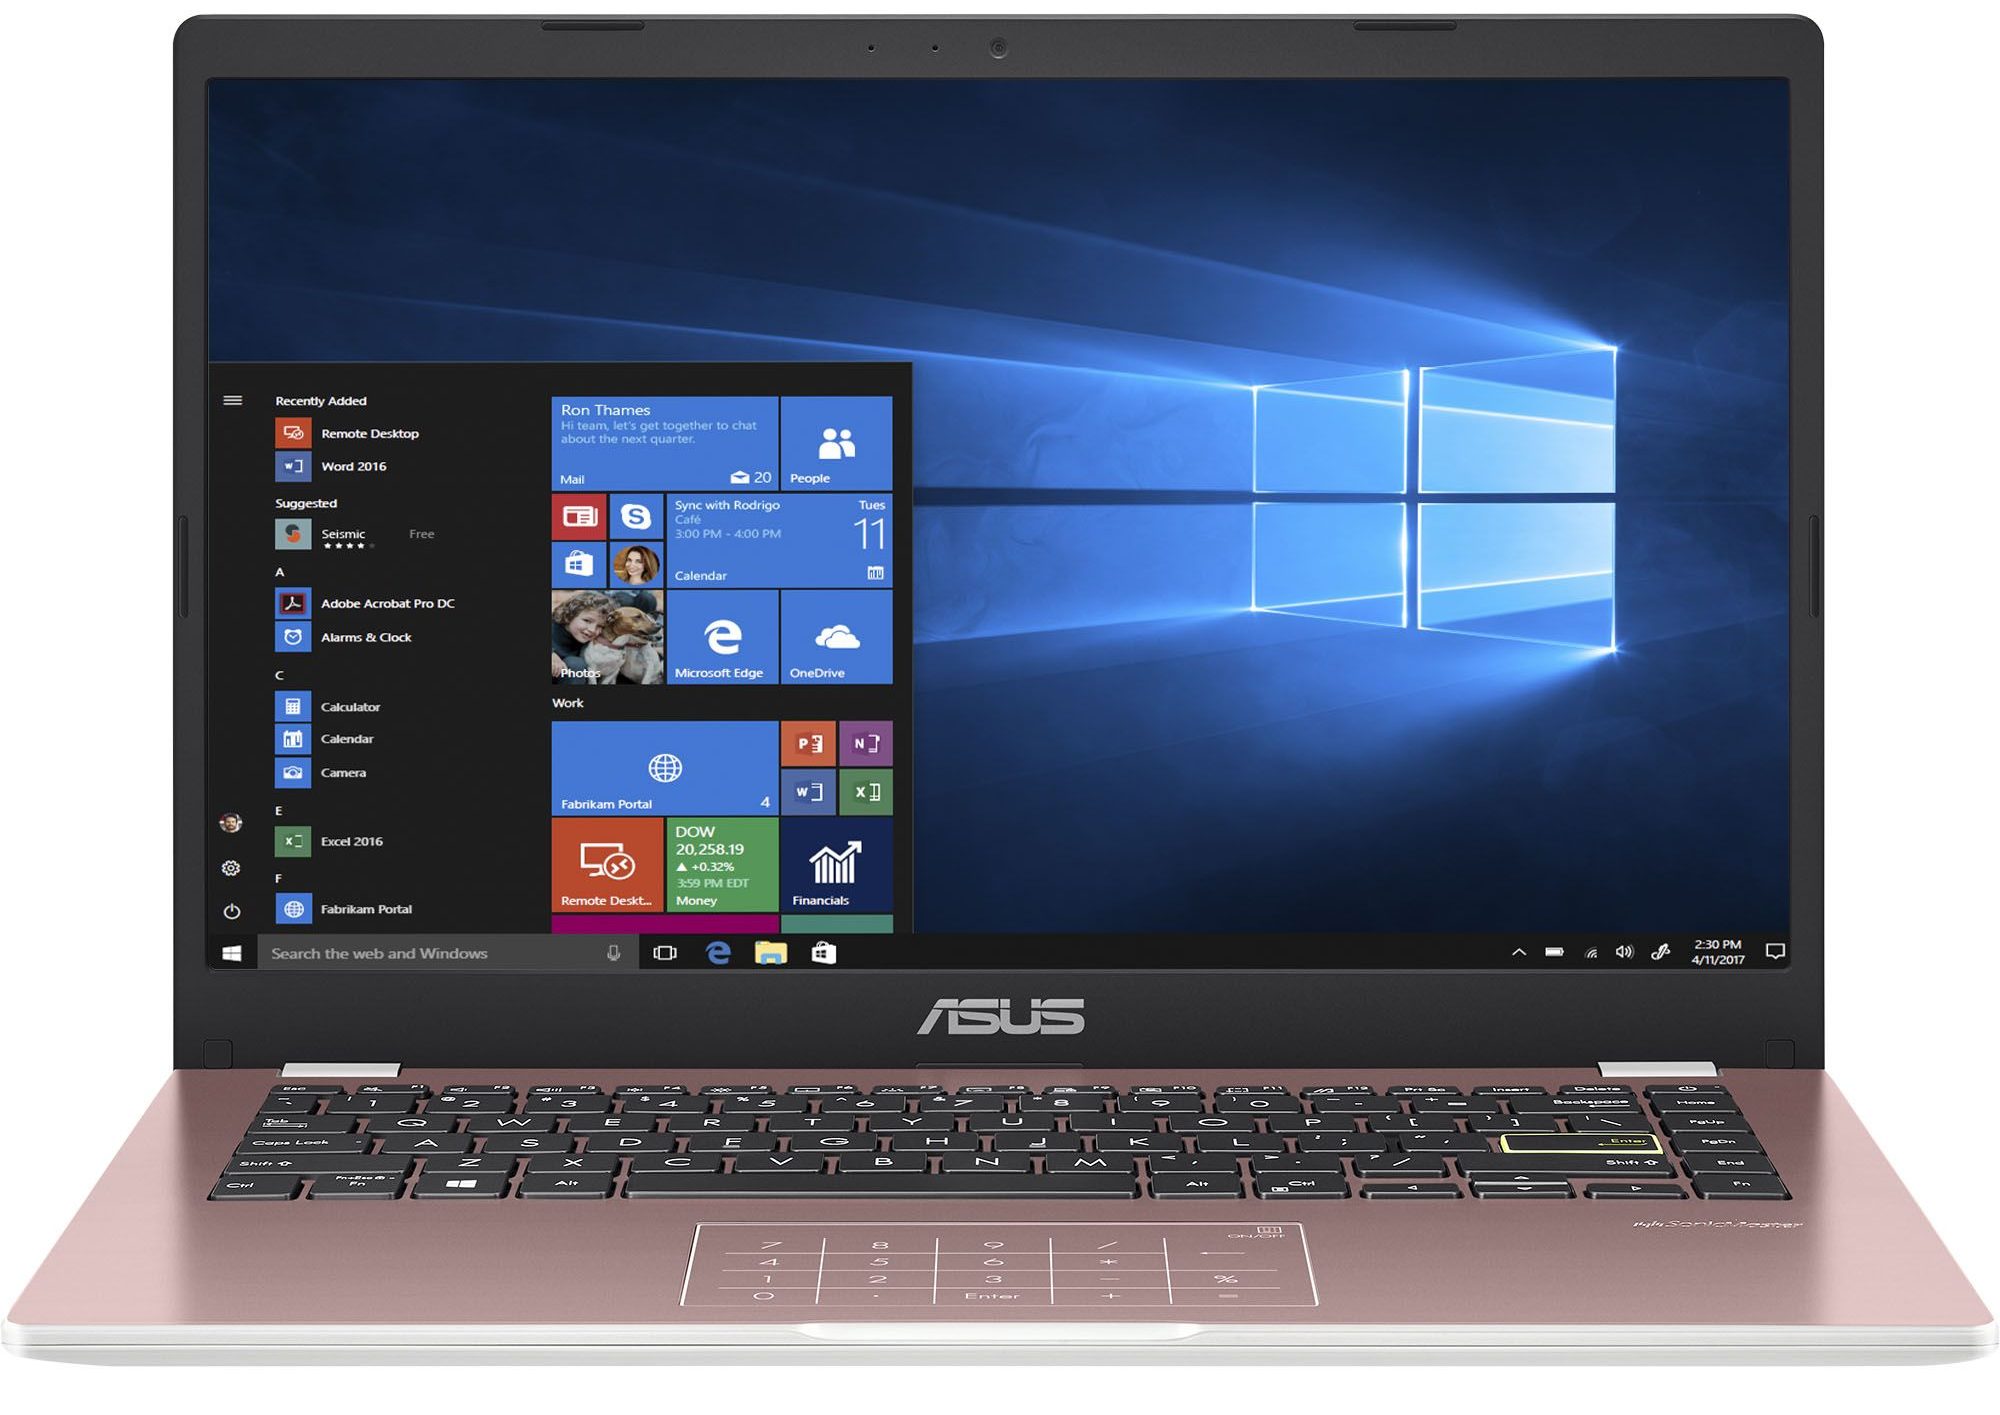 ASUS E410｜Laptops For Home｜ASUS India